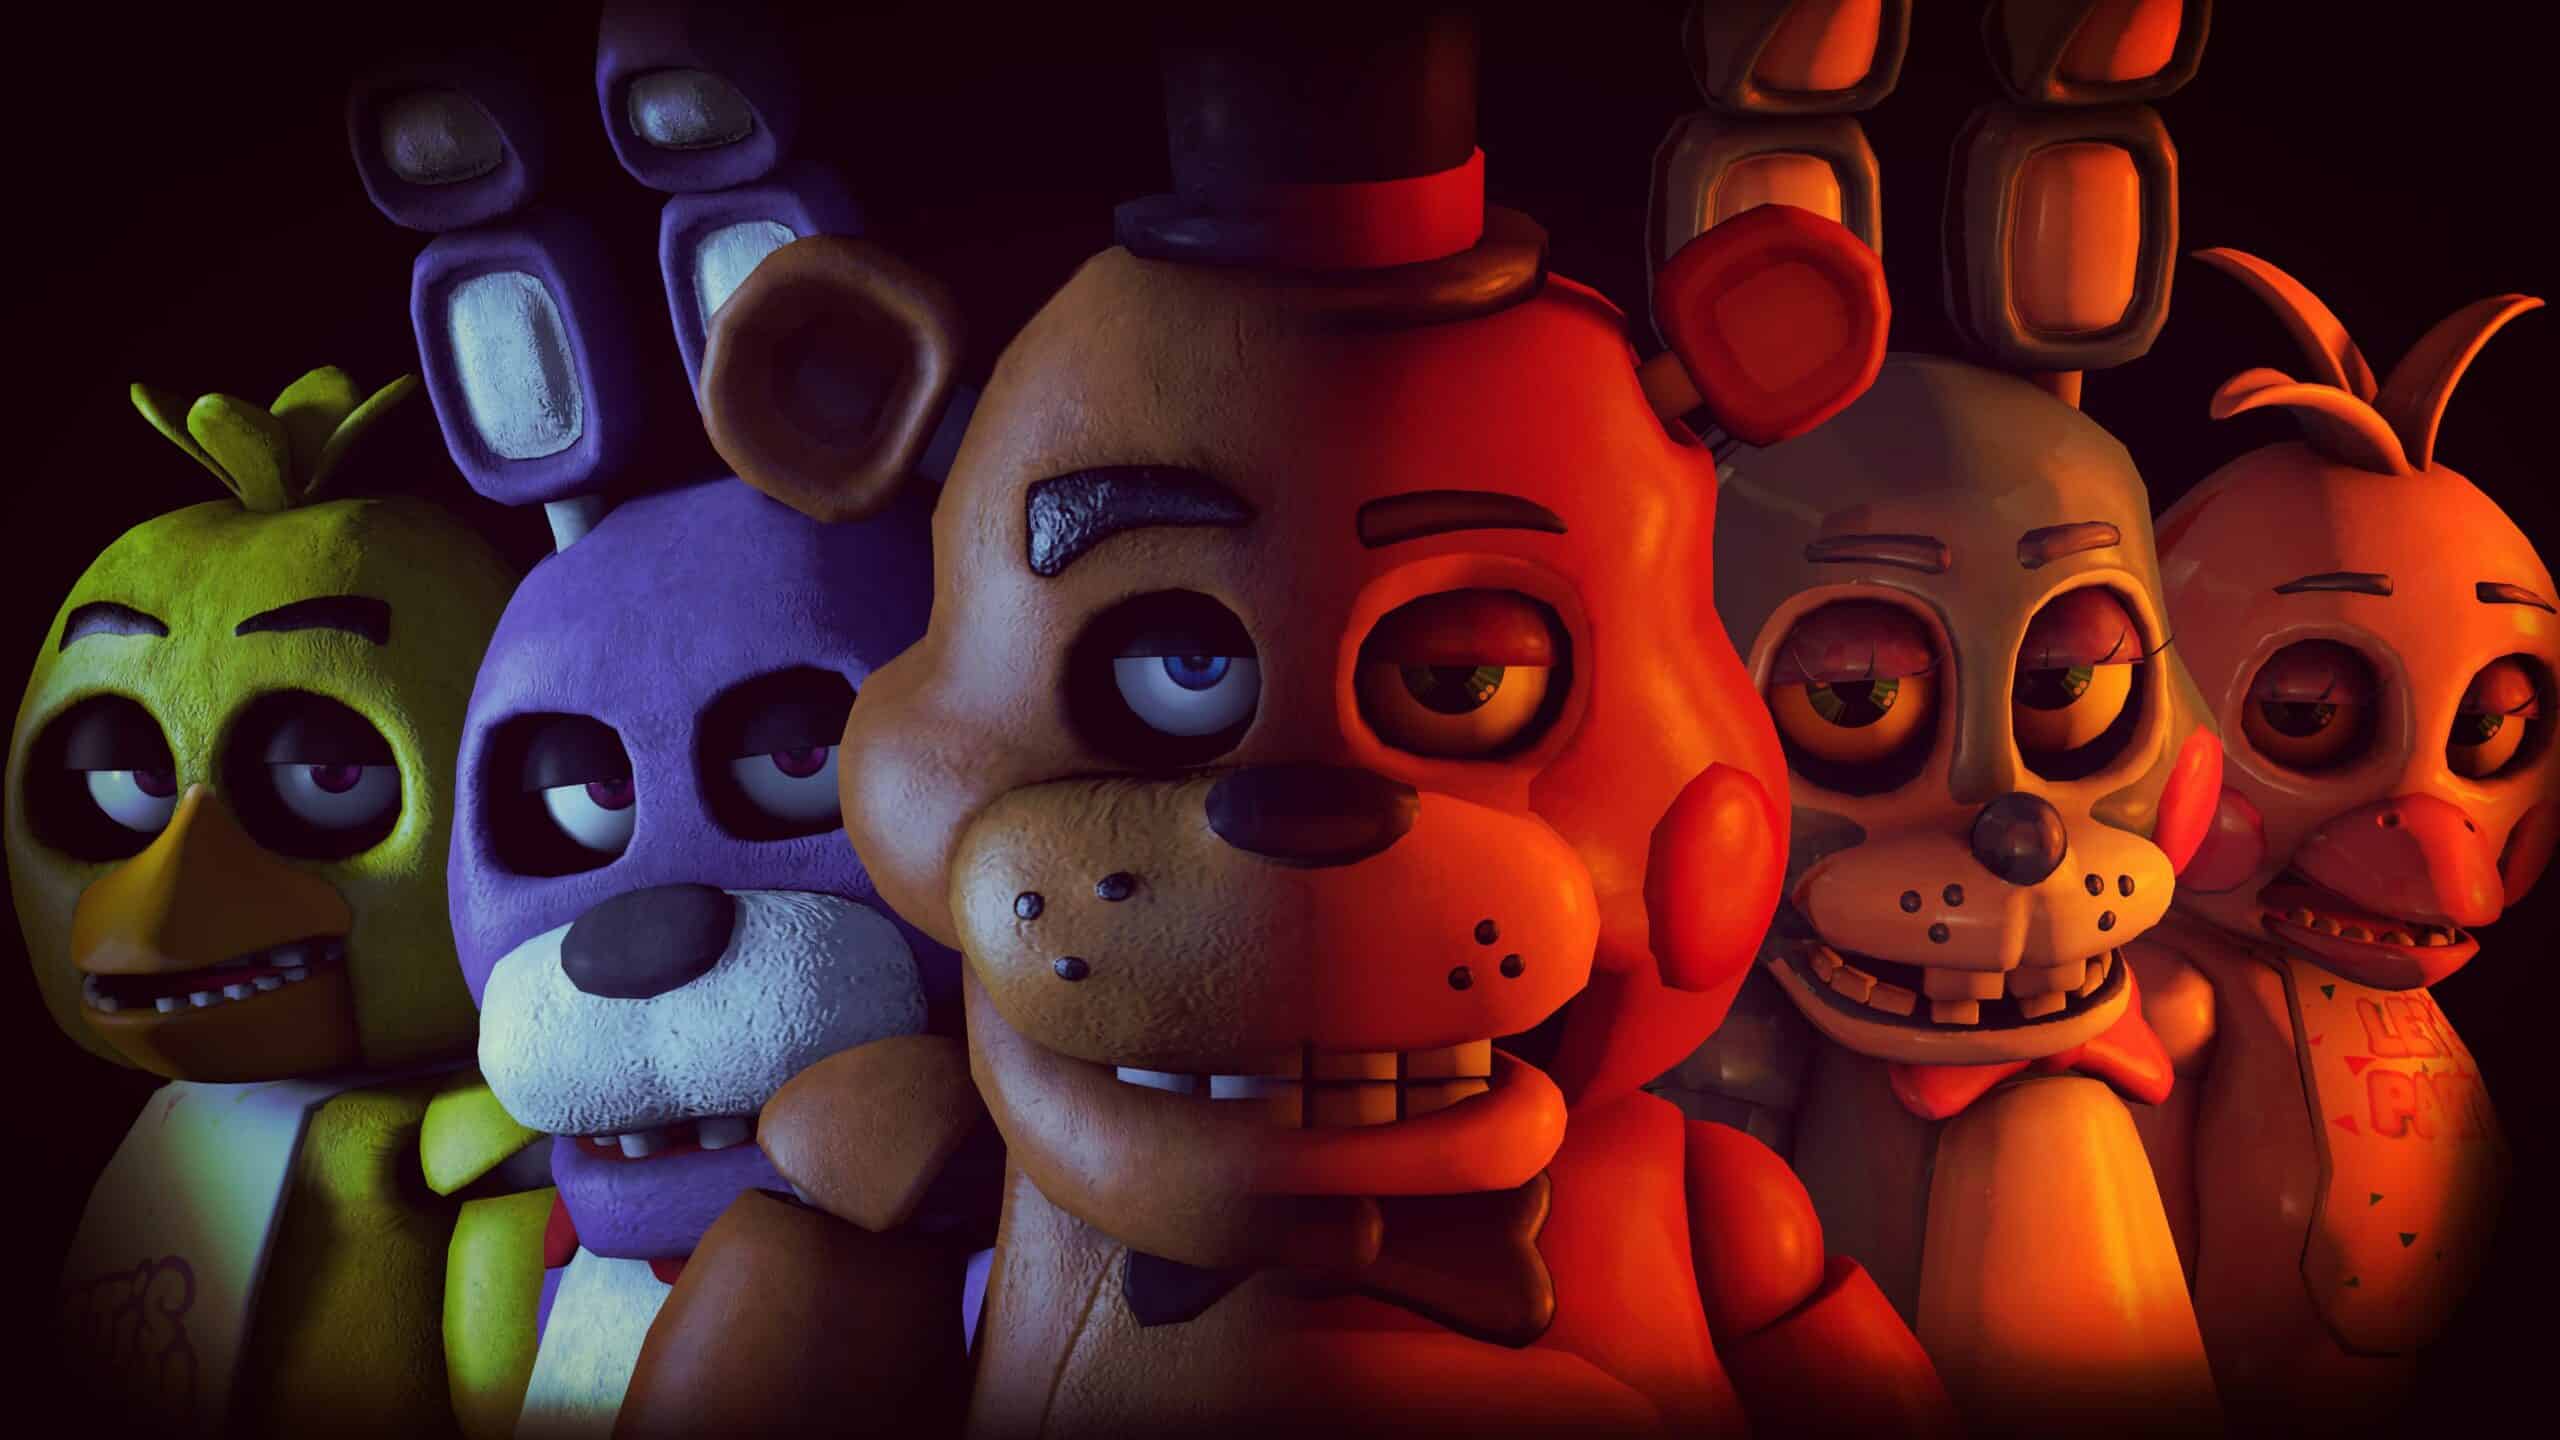 What's the Biggest Peacock Movie Ever? Five Nights at Freddy's